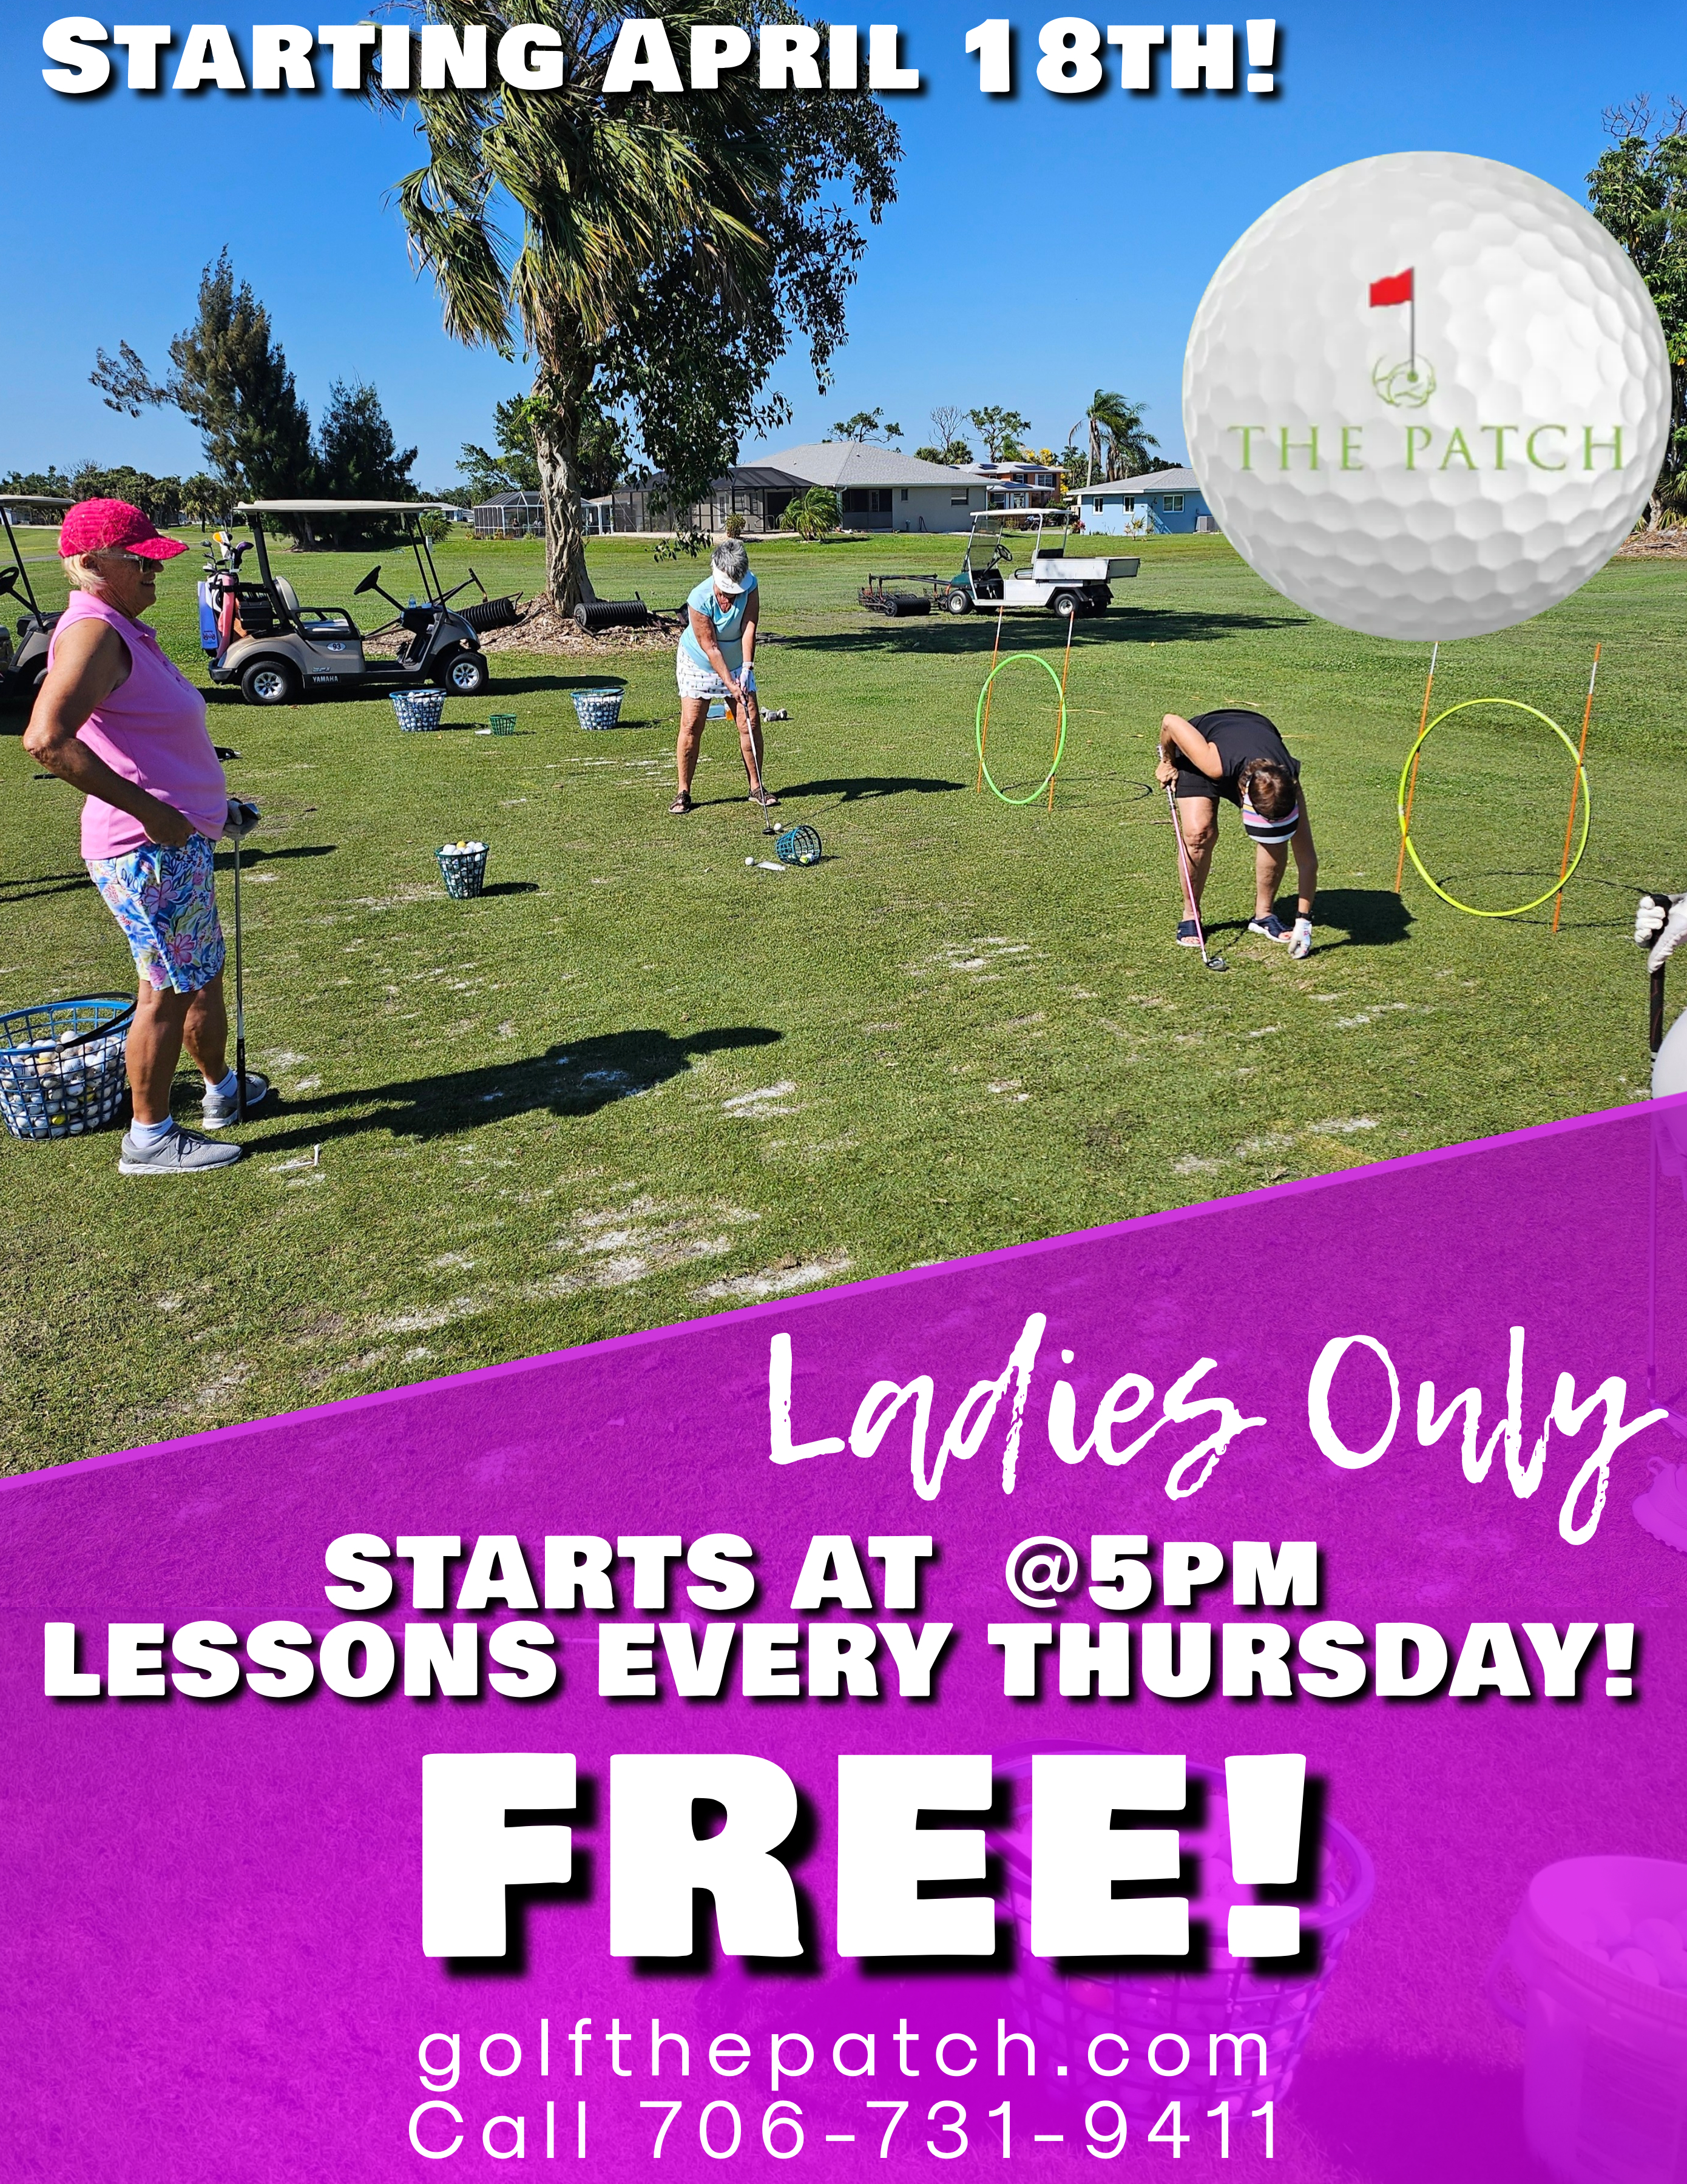 LADIES LESSONS EVERY THURSDAY FREE image